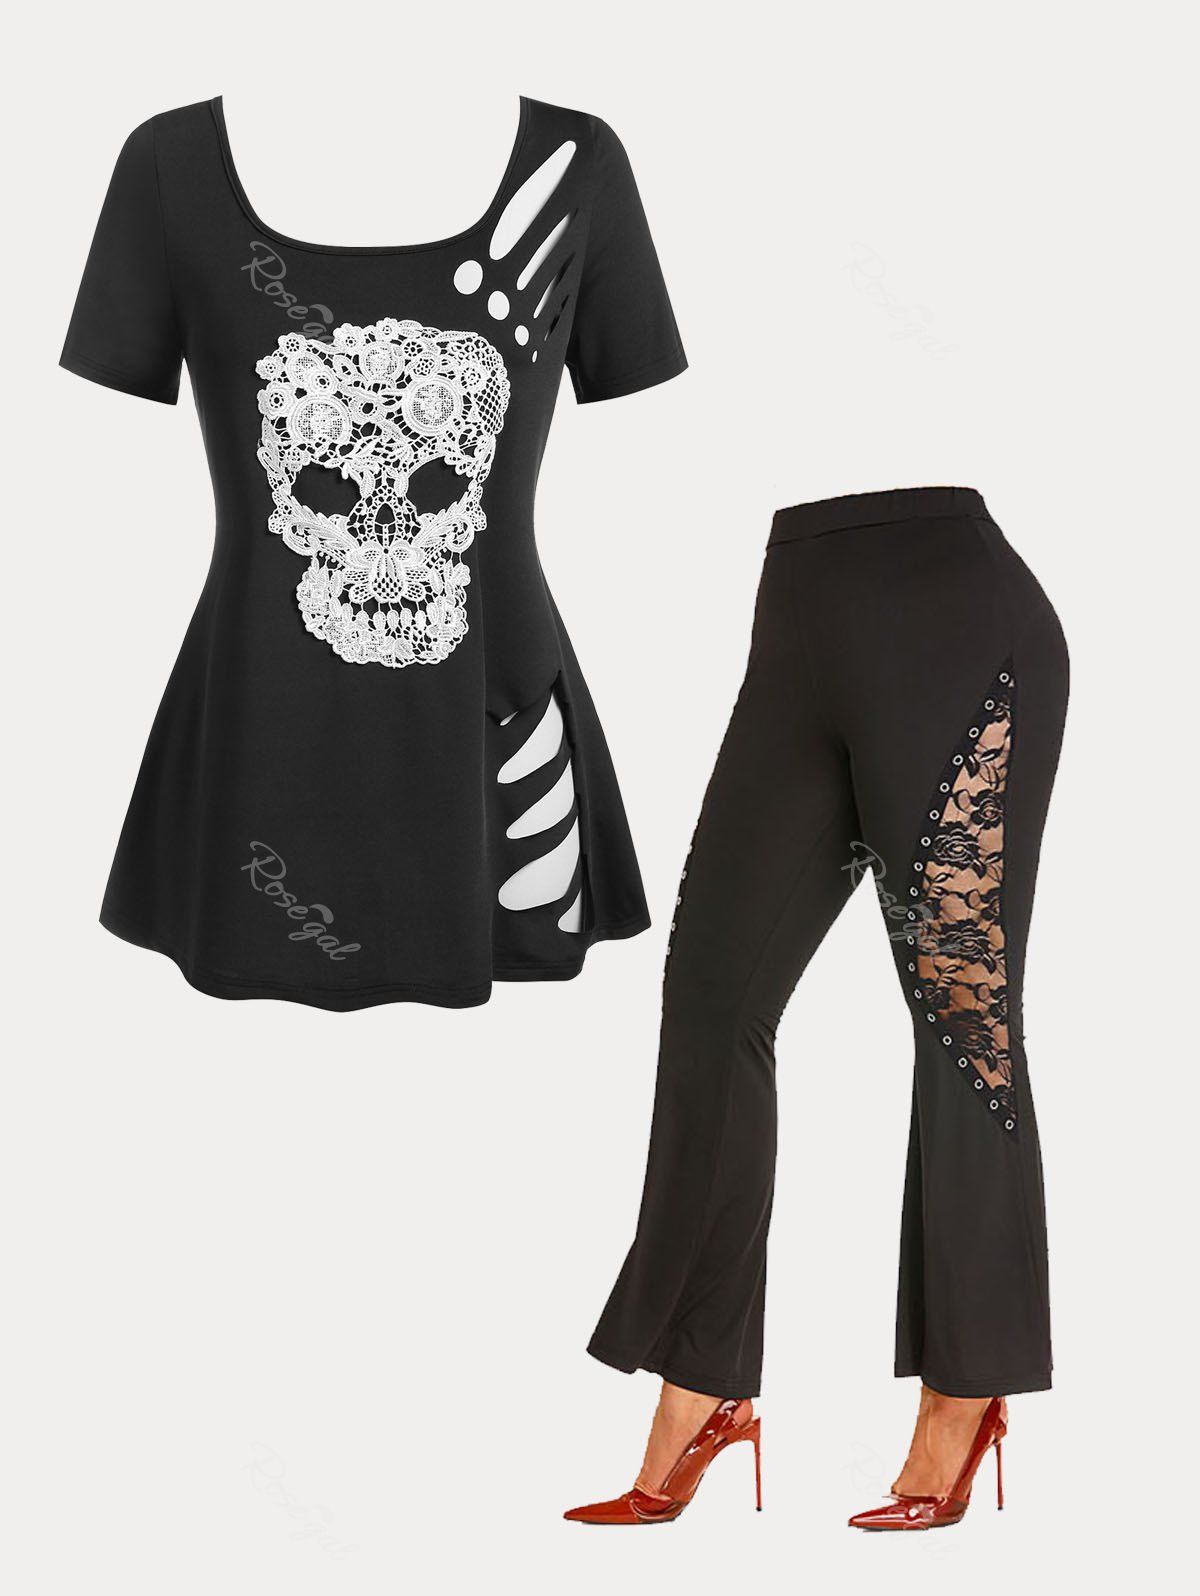 Discount Gothic Ripped Lace Skull Tee and High Waist Flare Pants Plus Size Summer Outfit  